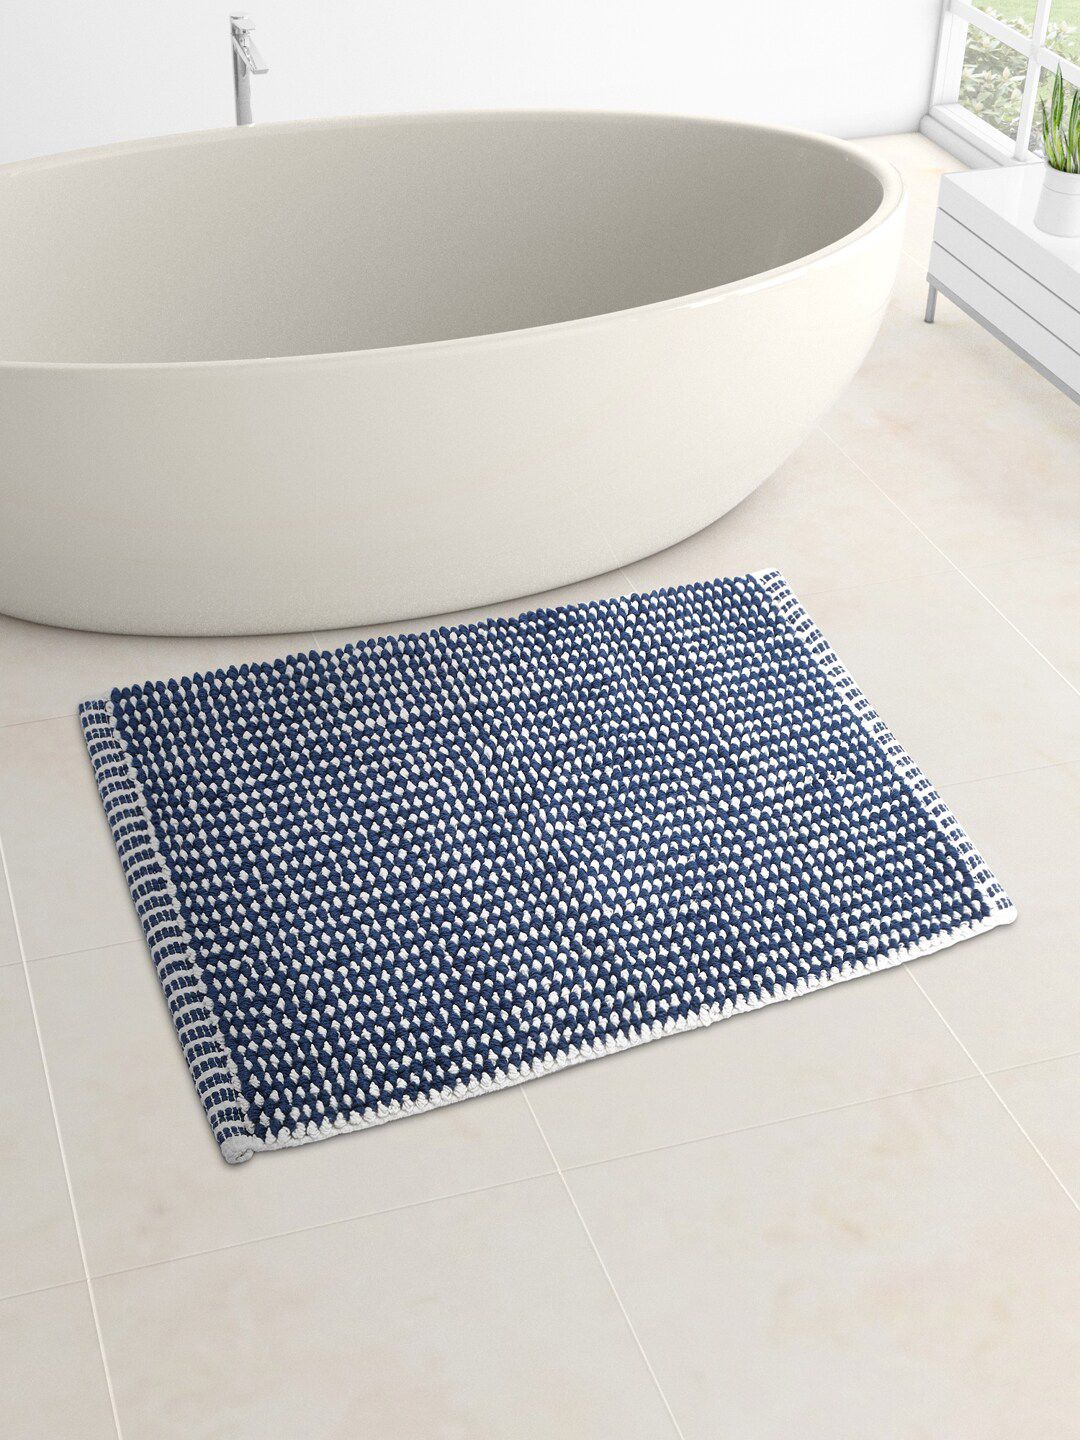 Living scapes by Pantaloons Blue & White Printed 1600 GSM Cotton Bath Rugs Price in India